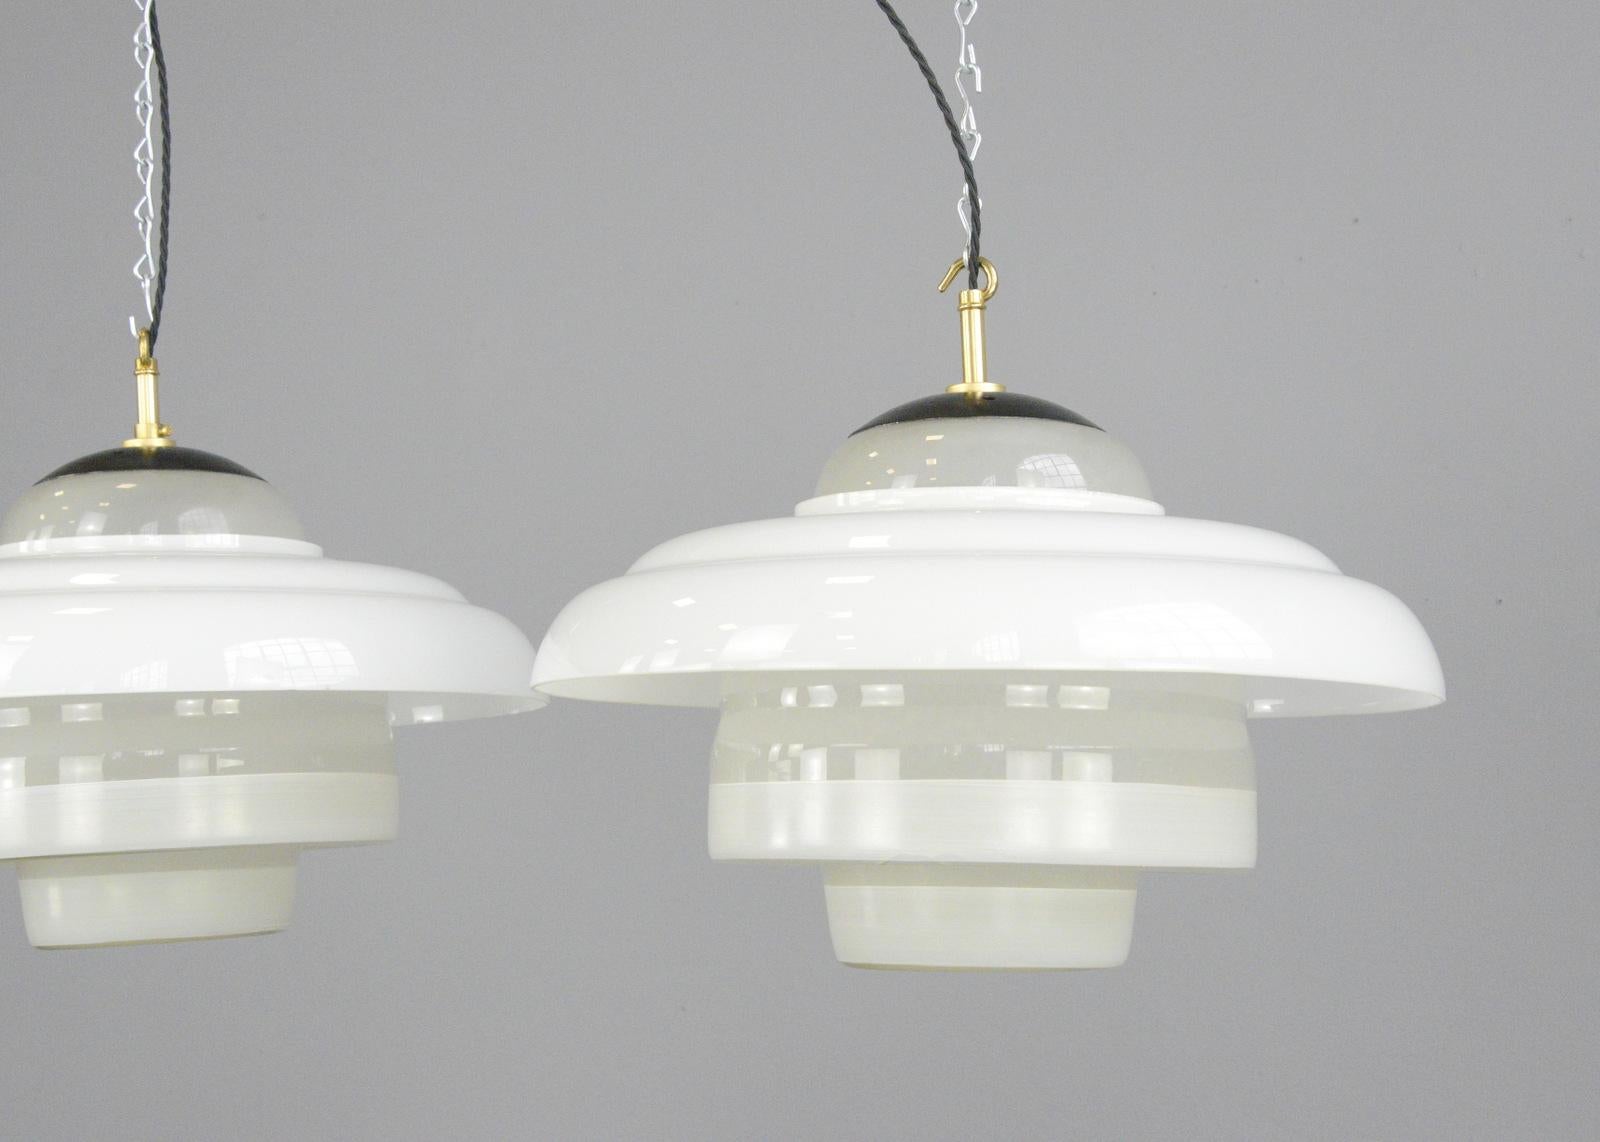 Bauhaus pendant lights by Mithras, circa 1930s

- Price is per light (2 available)
- Stepped opaline glass
- Opaline glass outer ring
- Comes with 100cm of black braided cable
- Comes with ceiling rose and chain
- Takes E27 fitting bulbs
-